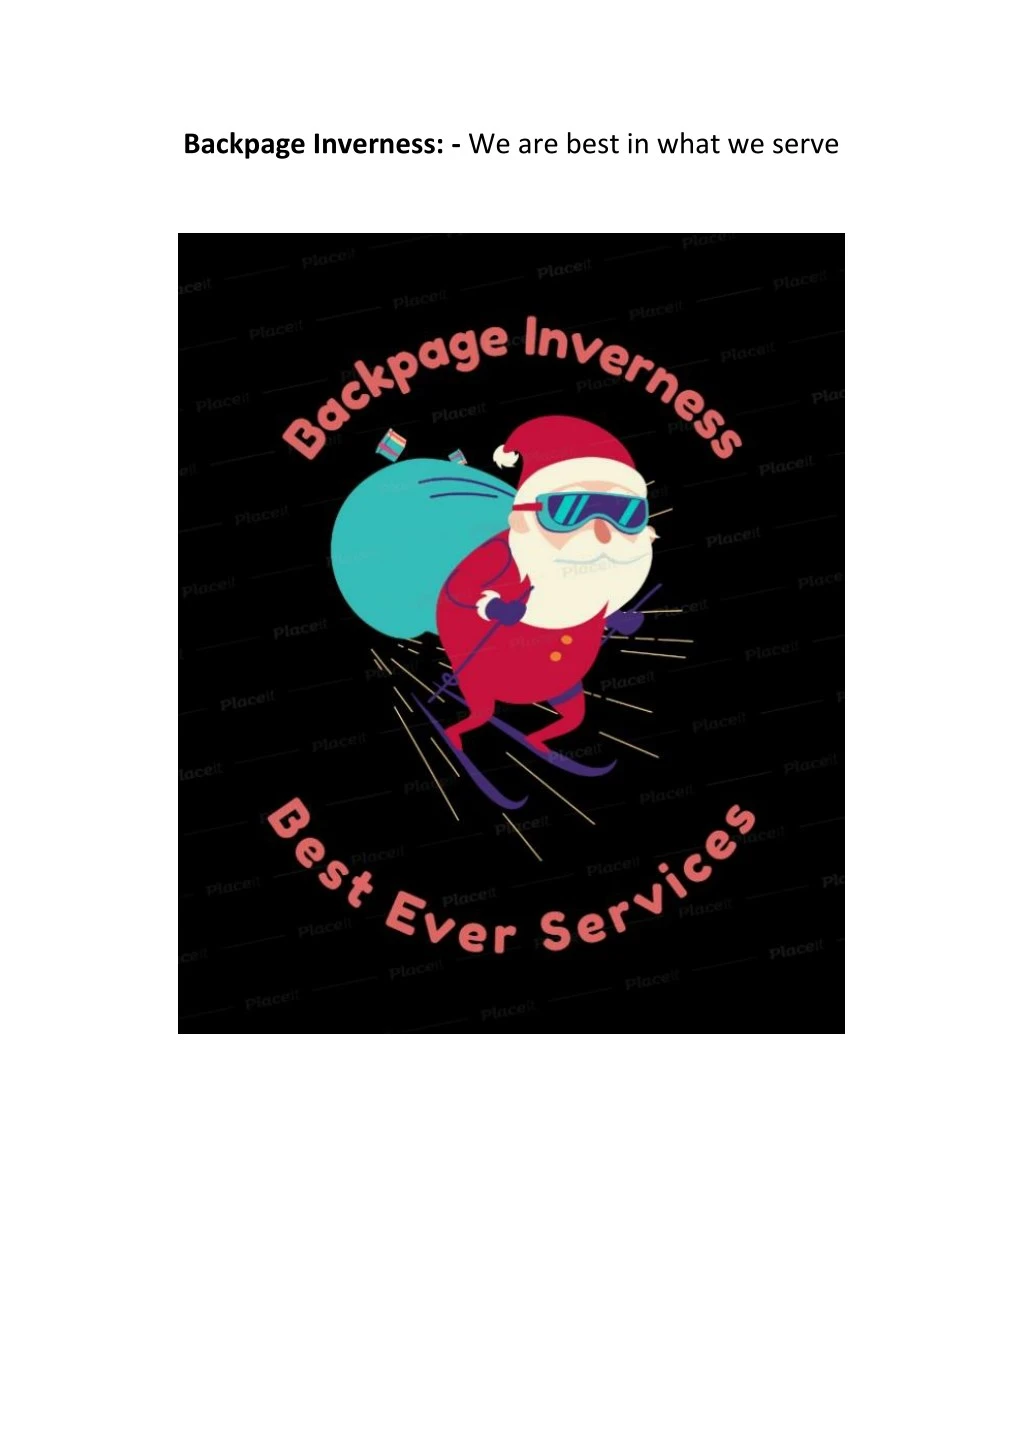 backpage inverness we are best in what we serve